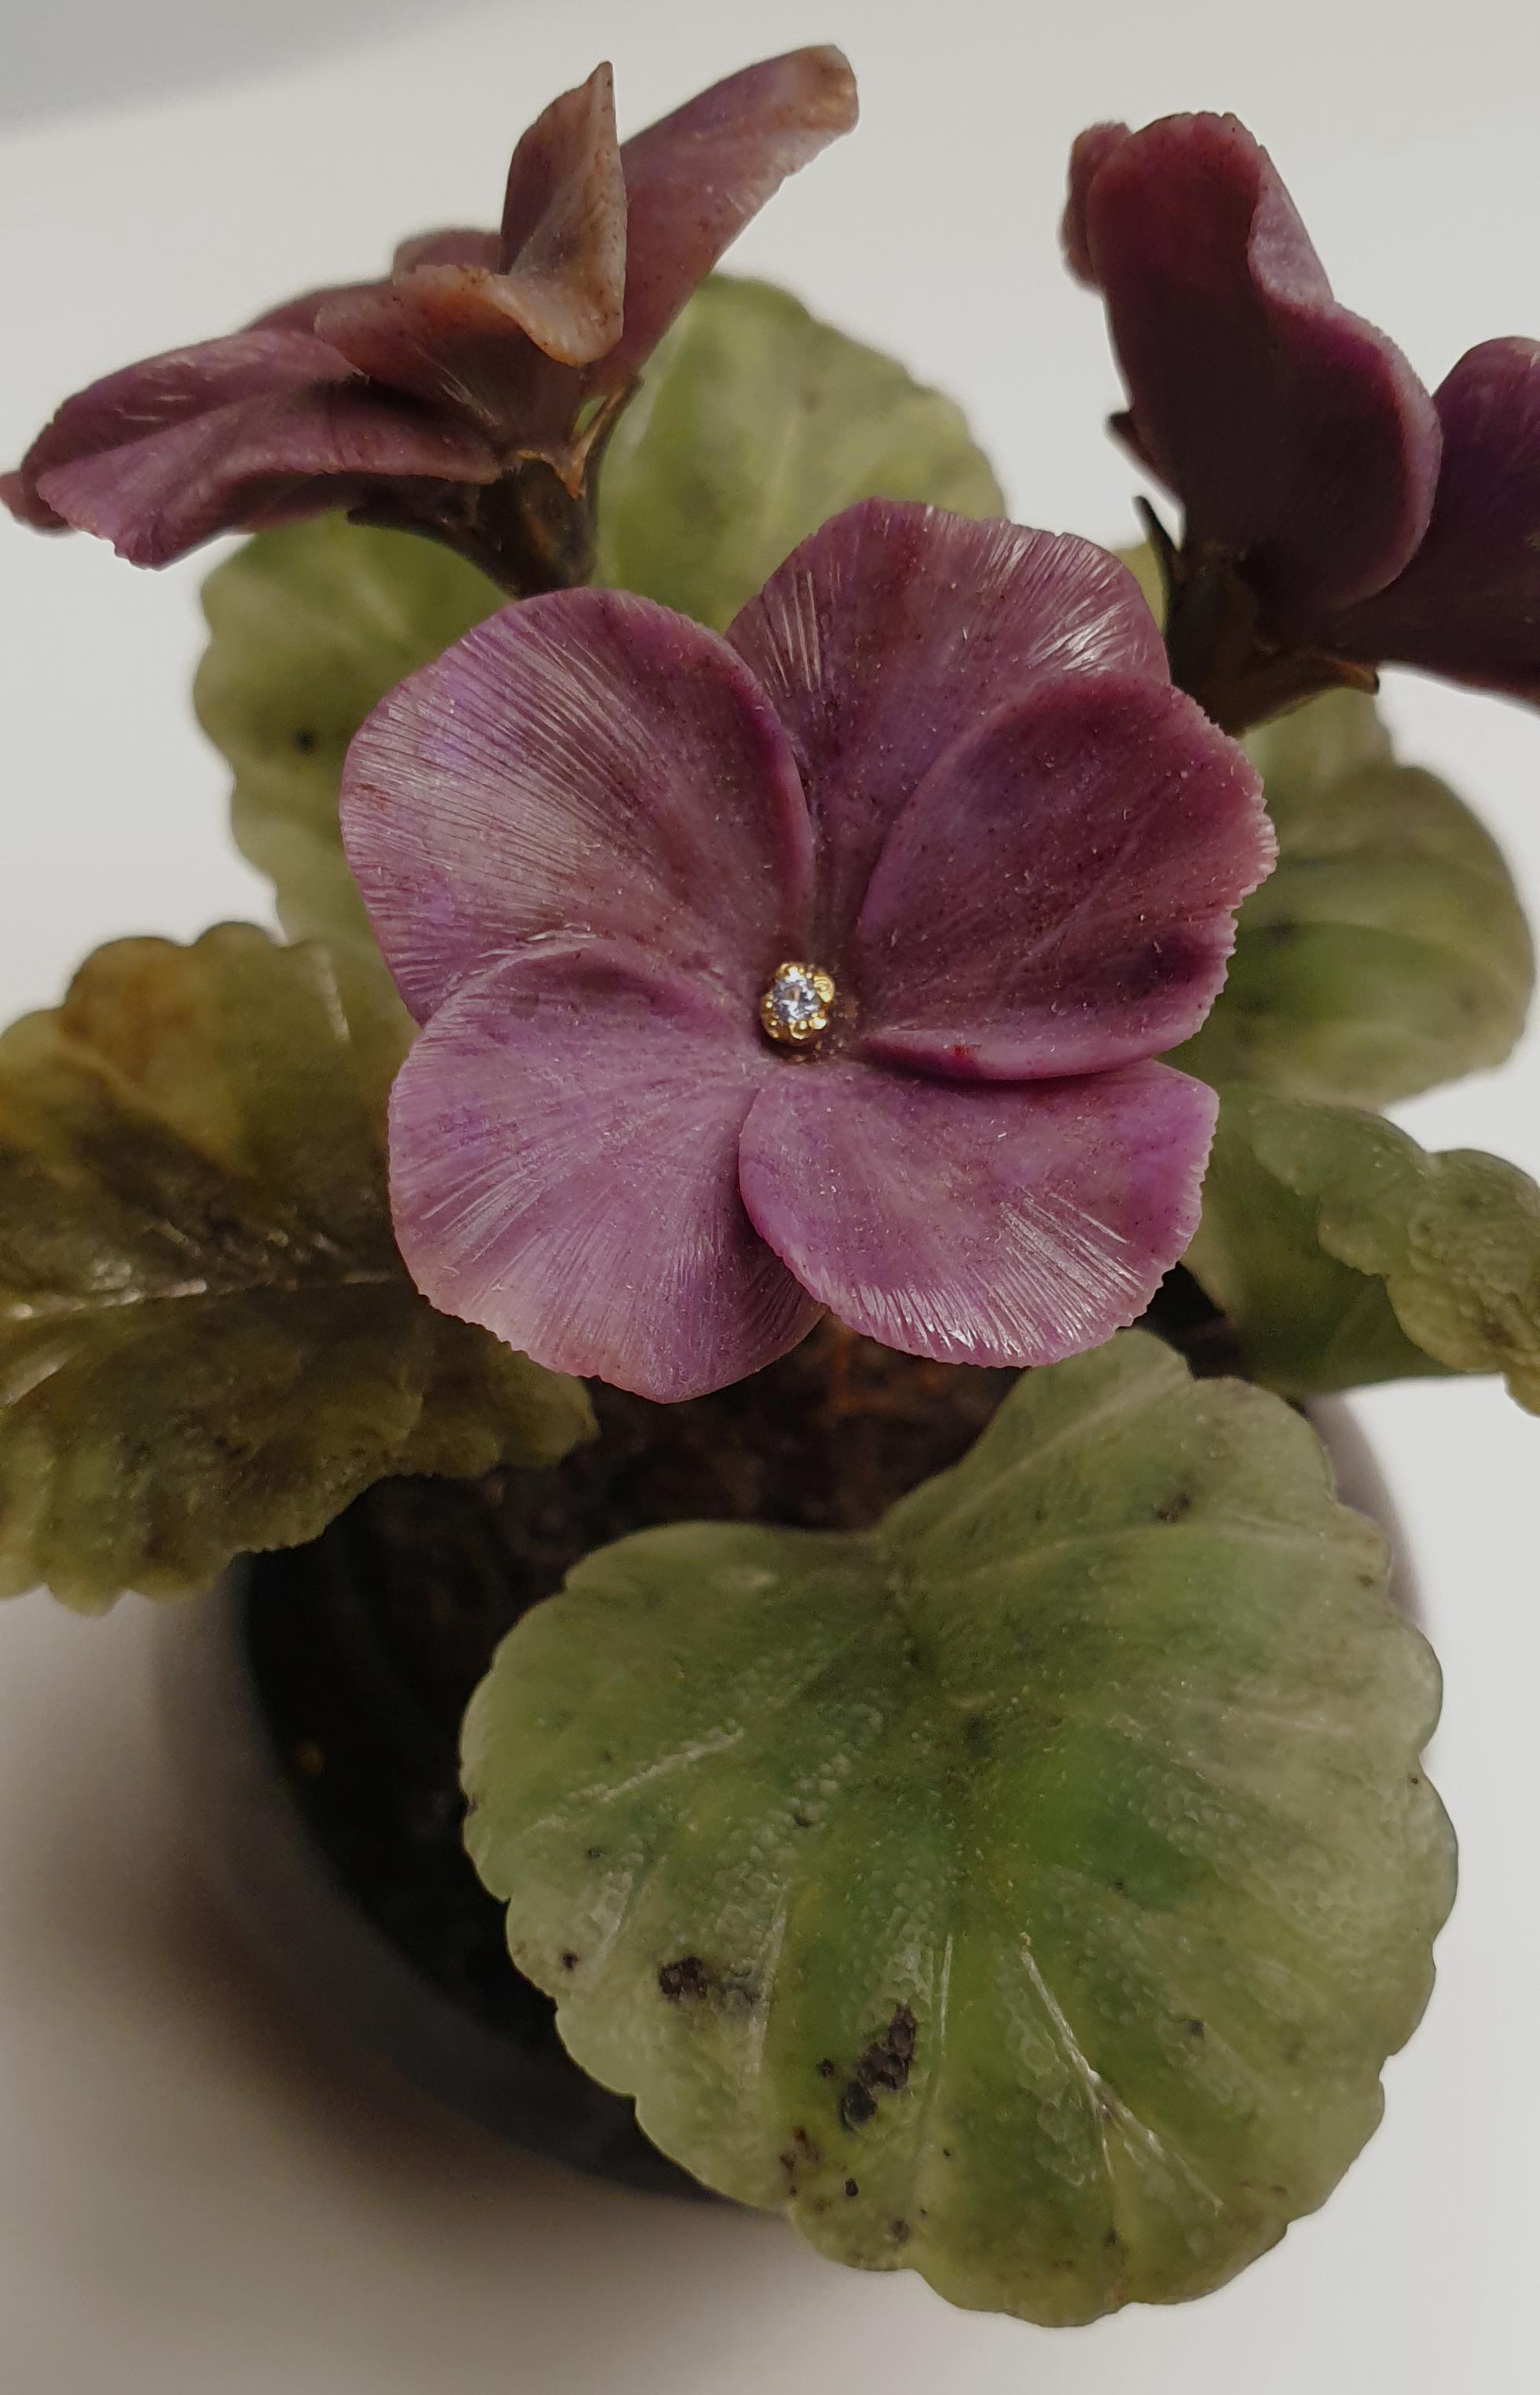 Sterling silver 22k, jade, charoite Violets sculpture
Precious objects in the form of floral sprays have a long history in Russia. The realistic violet petals are carved from charoite evoking the fine gradations found in nature.